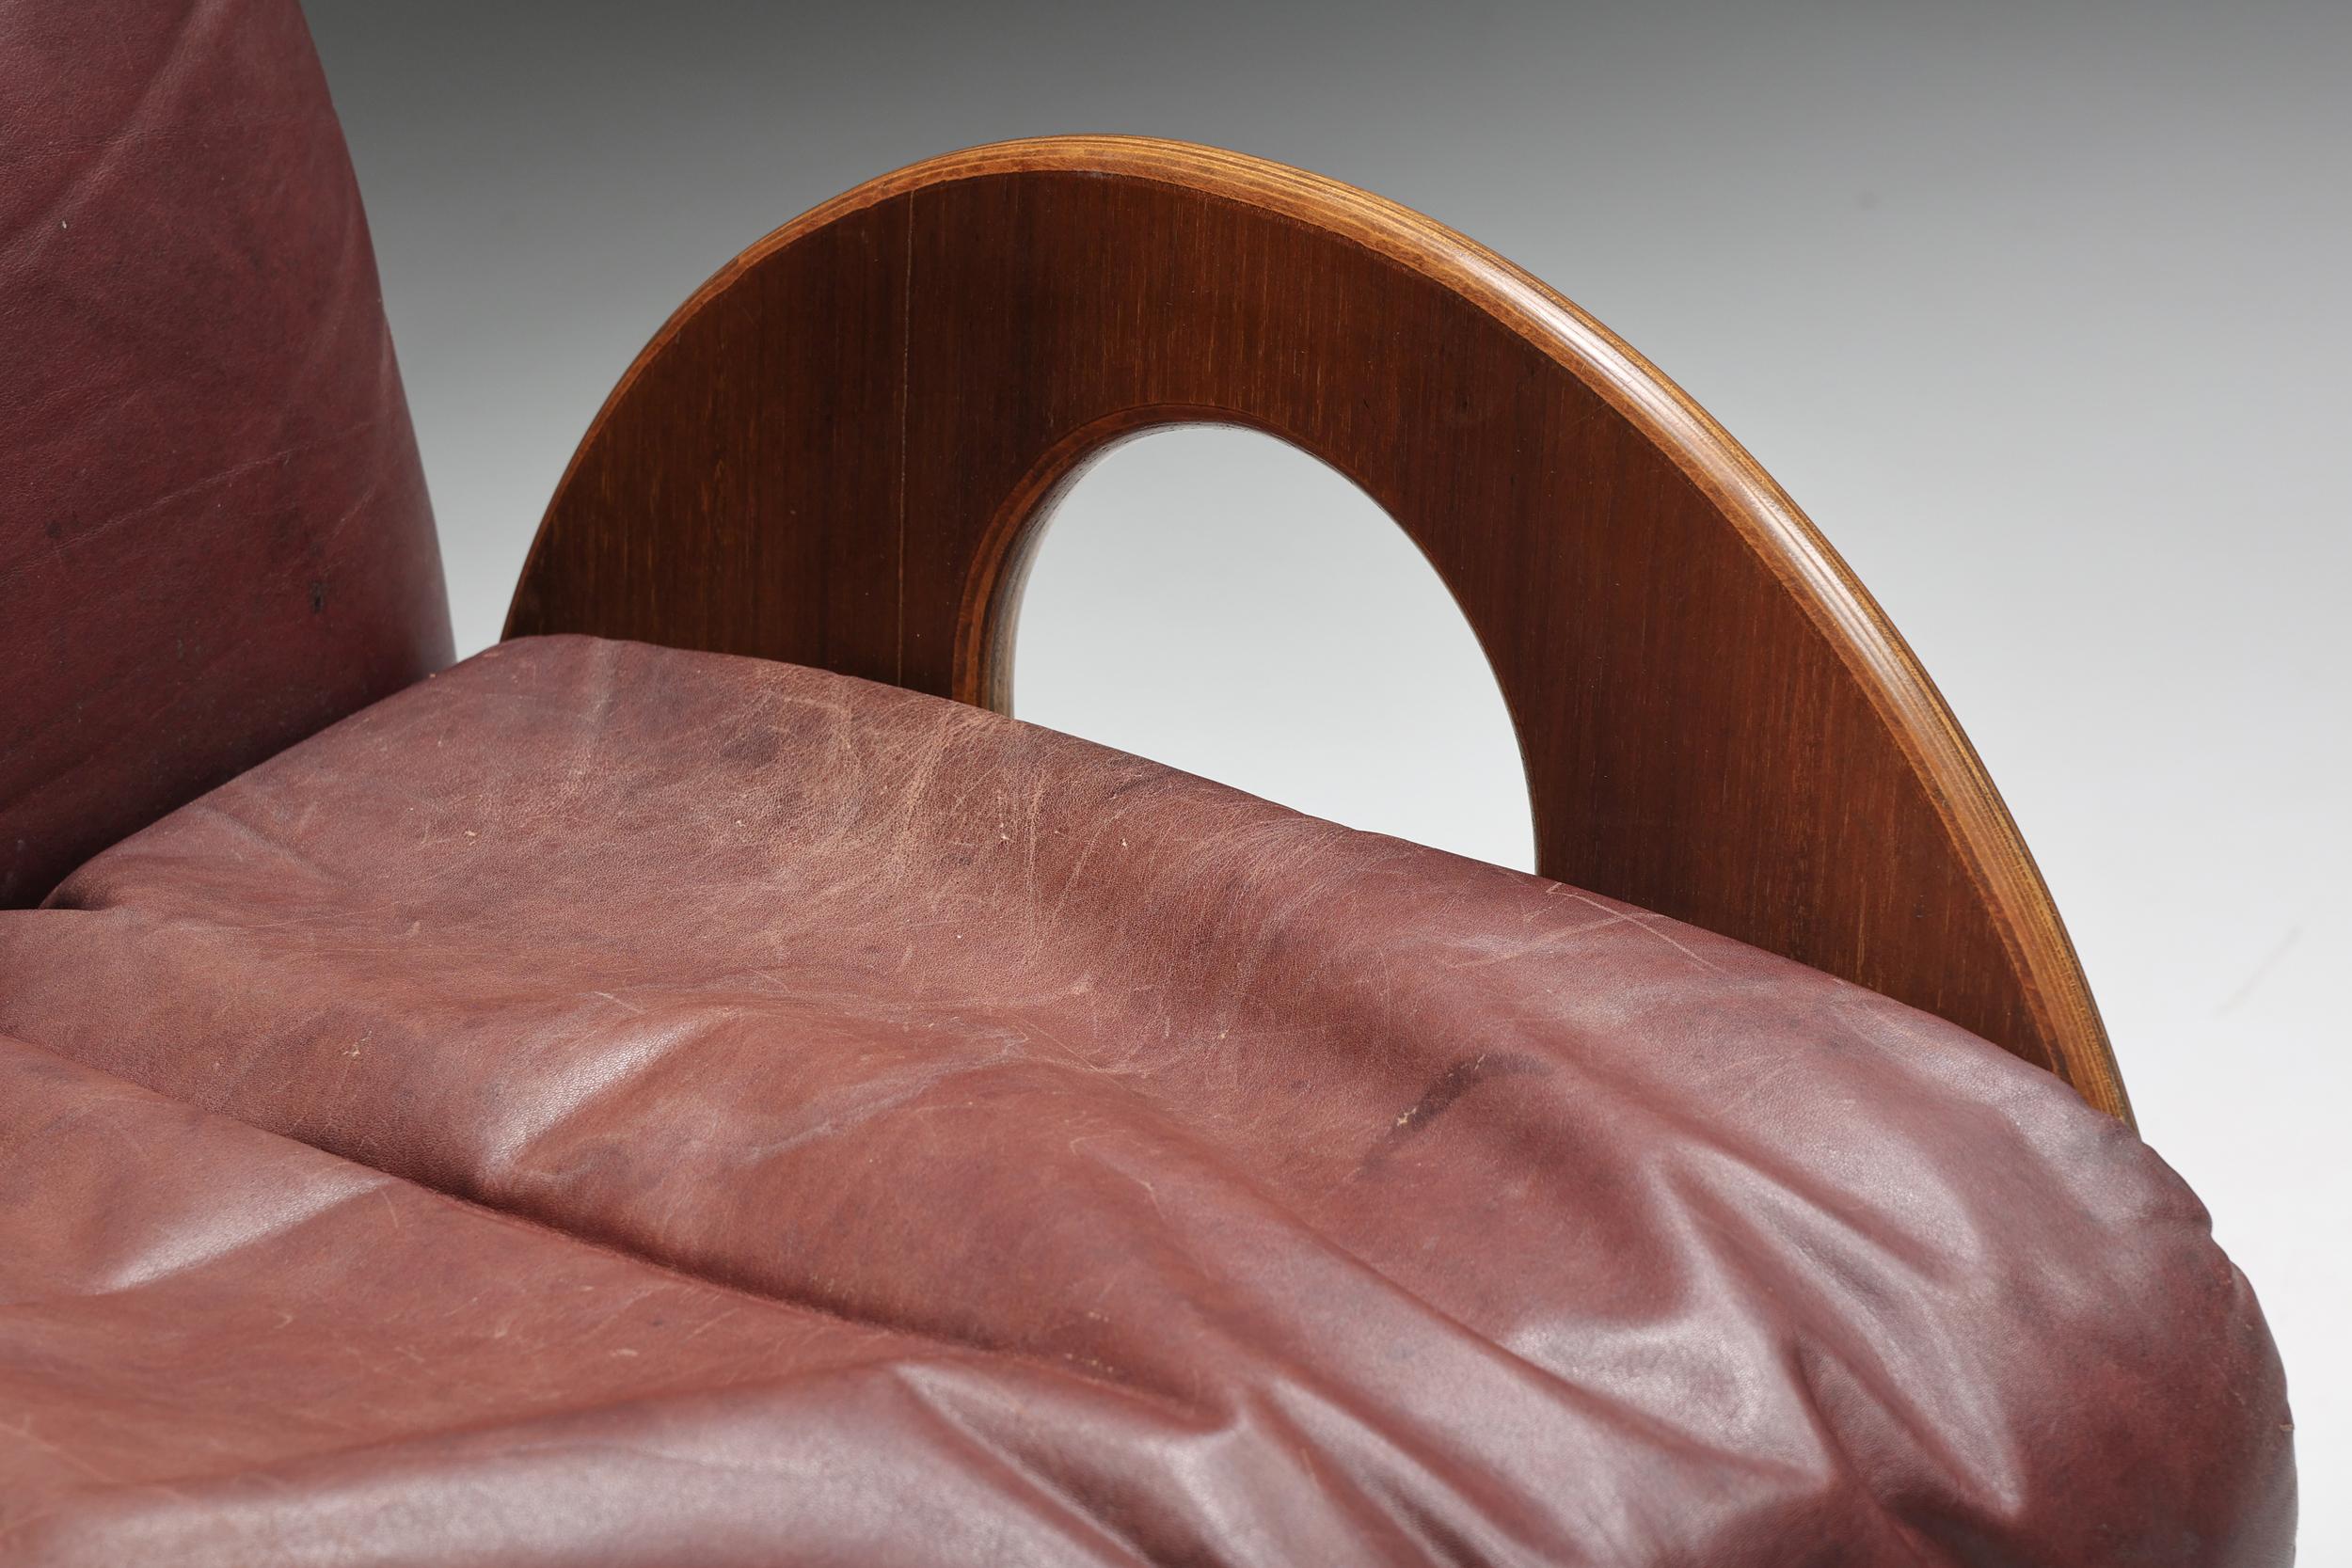 Gae Aulenti Arcata Easy Chair in Walnut and Burgundy Leather, 1960s For Sale 3